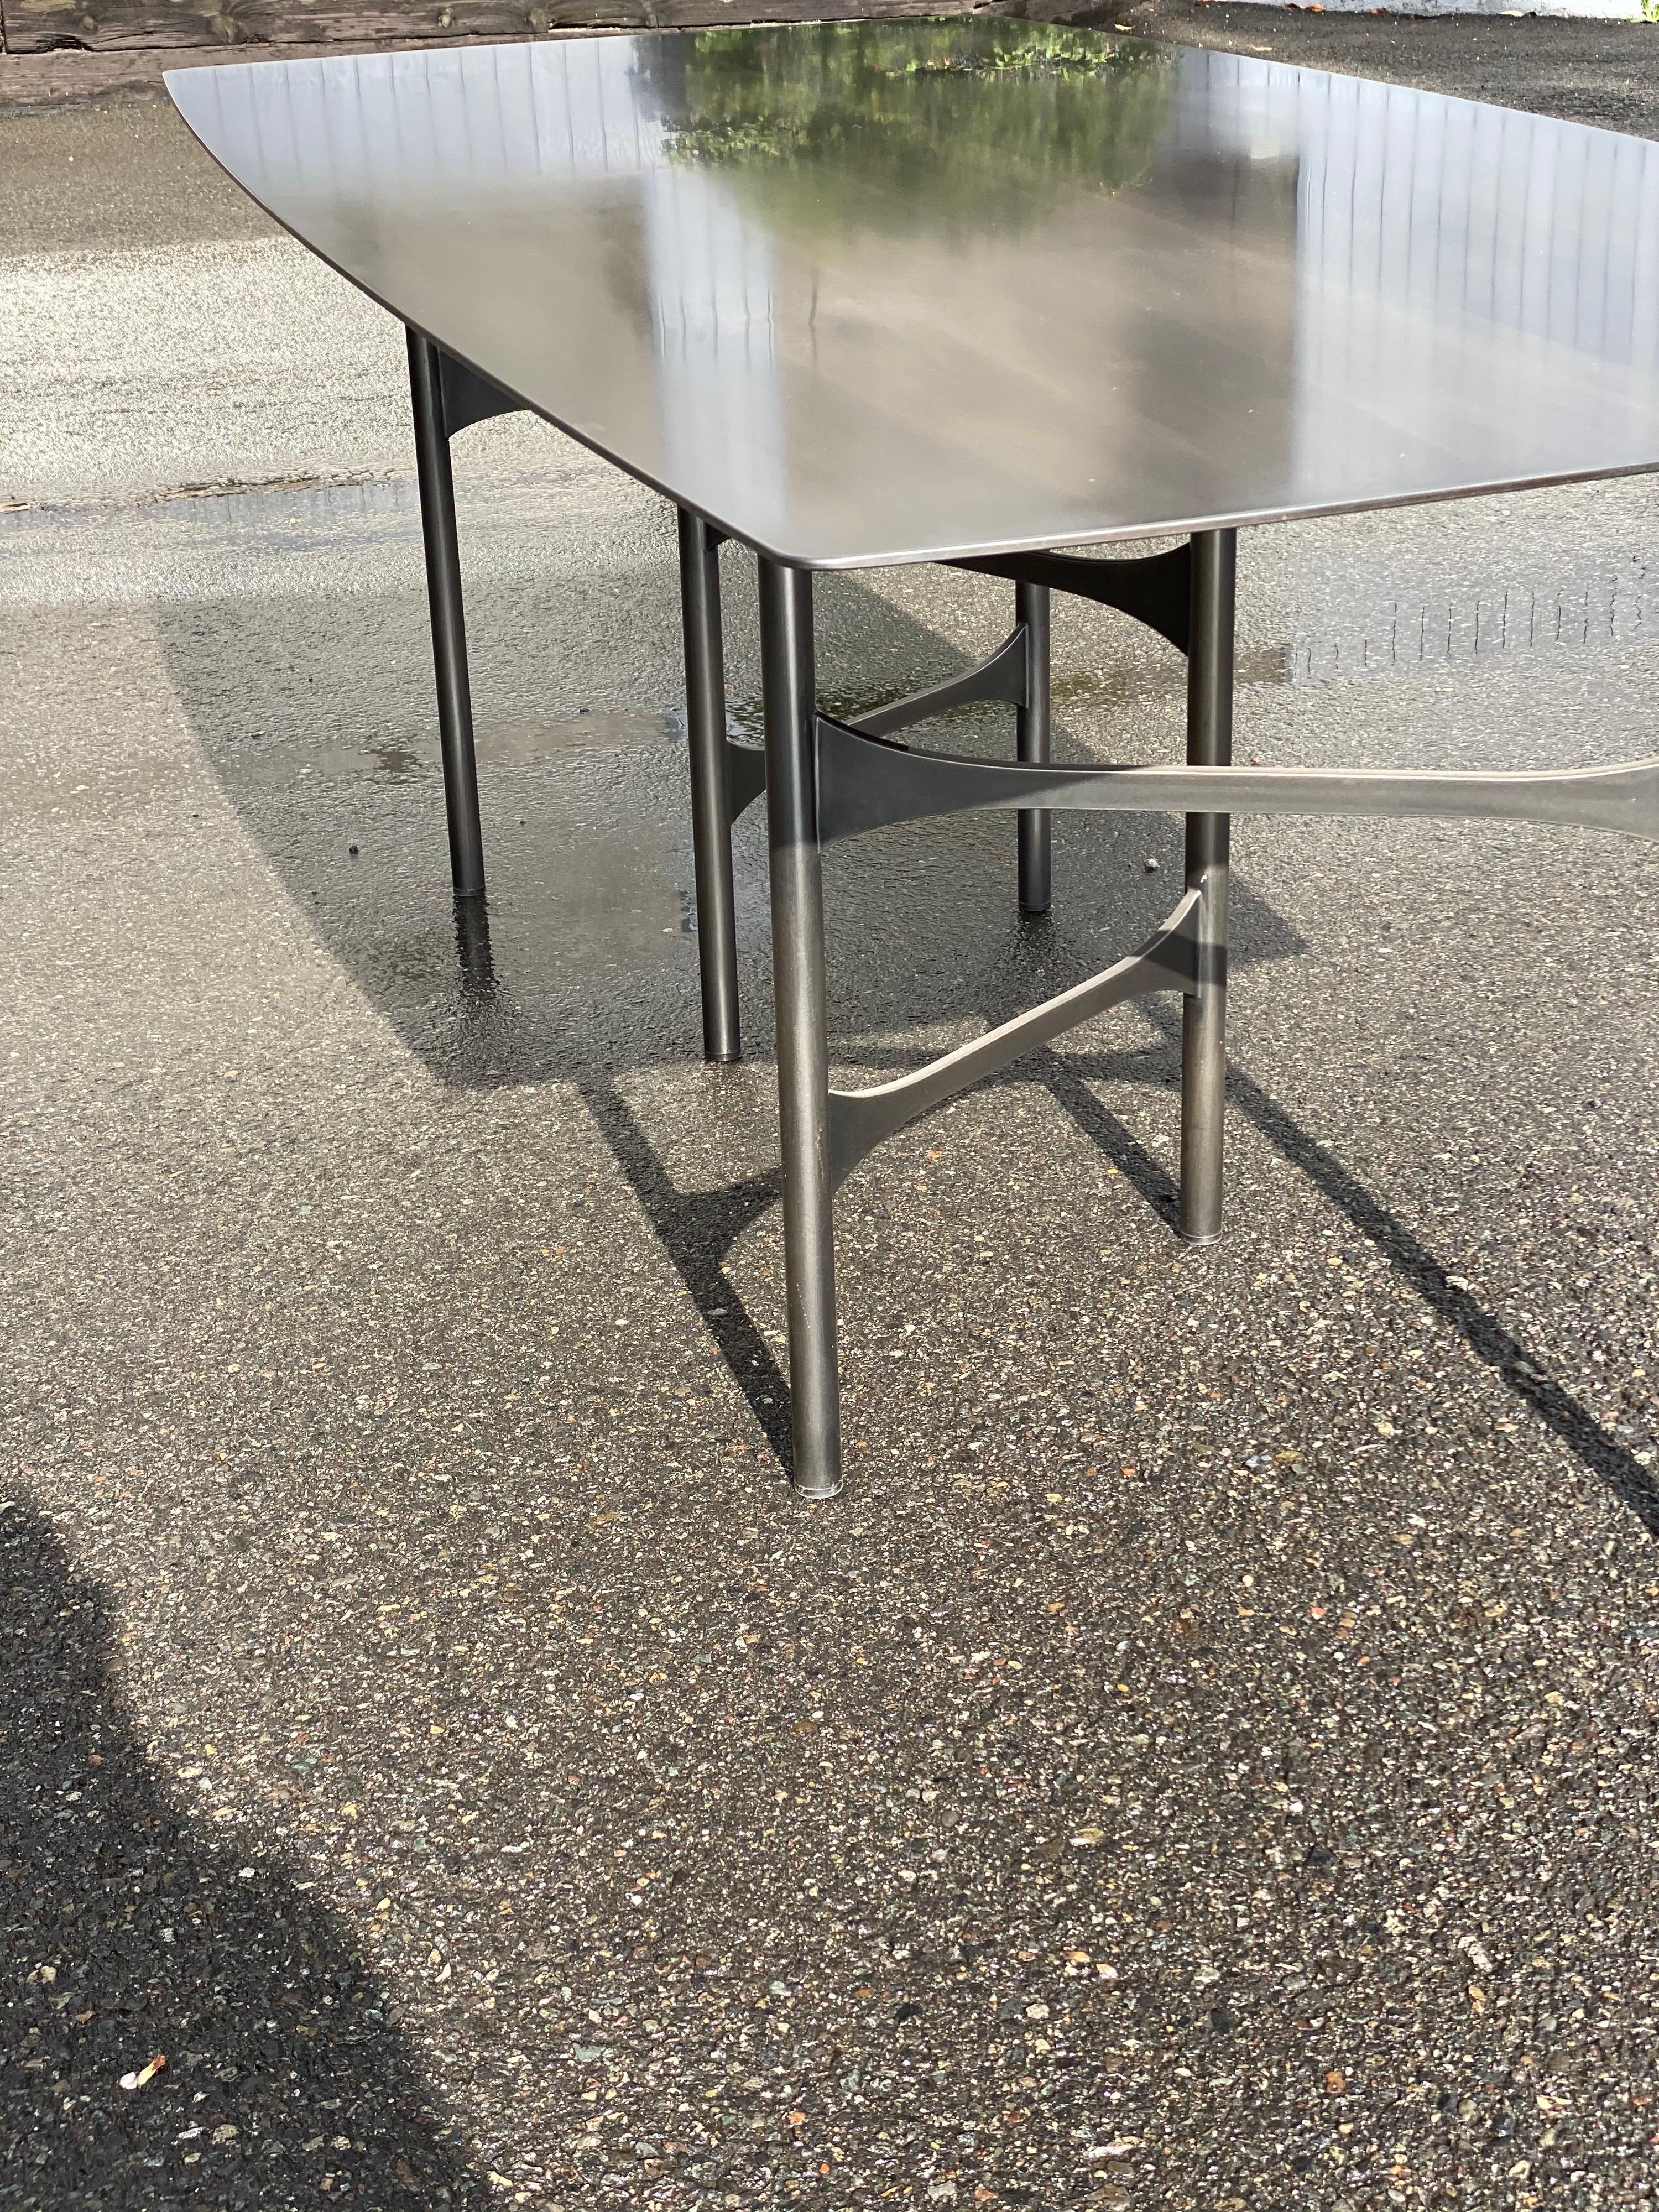 Rectangular Smooth Metal Cross Beam Table in Linear Blackened Finish In Stock 1